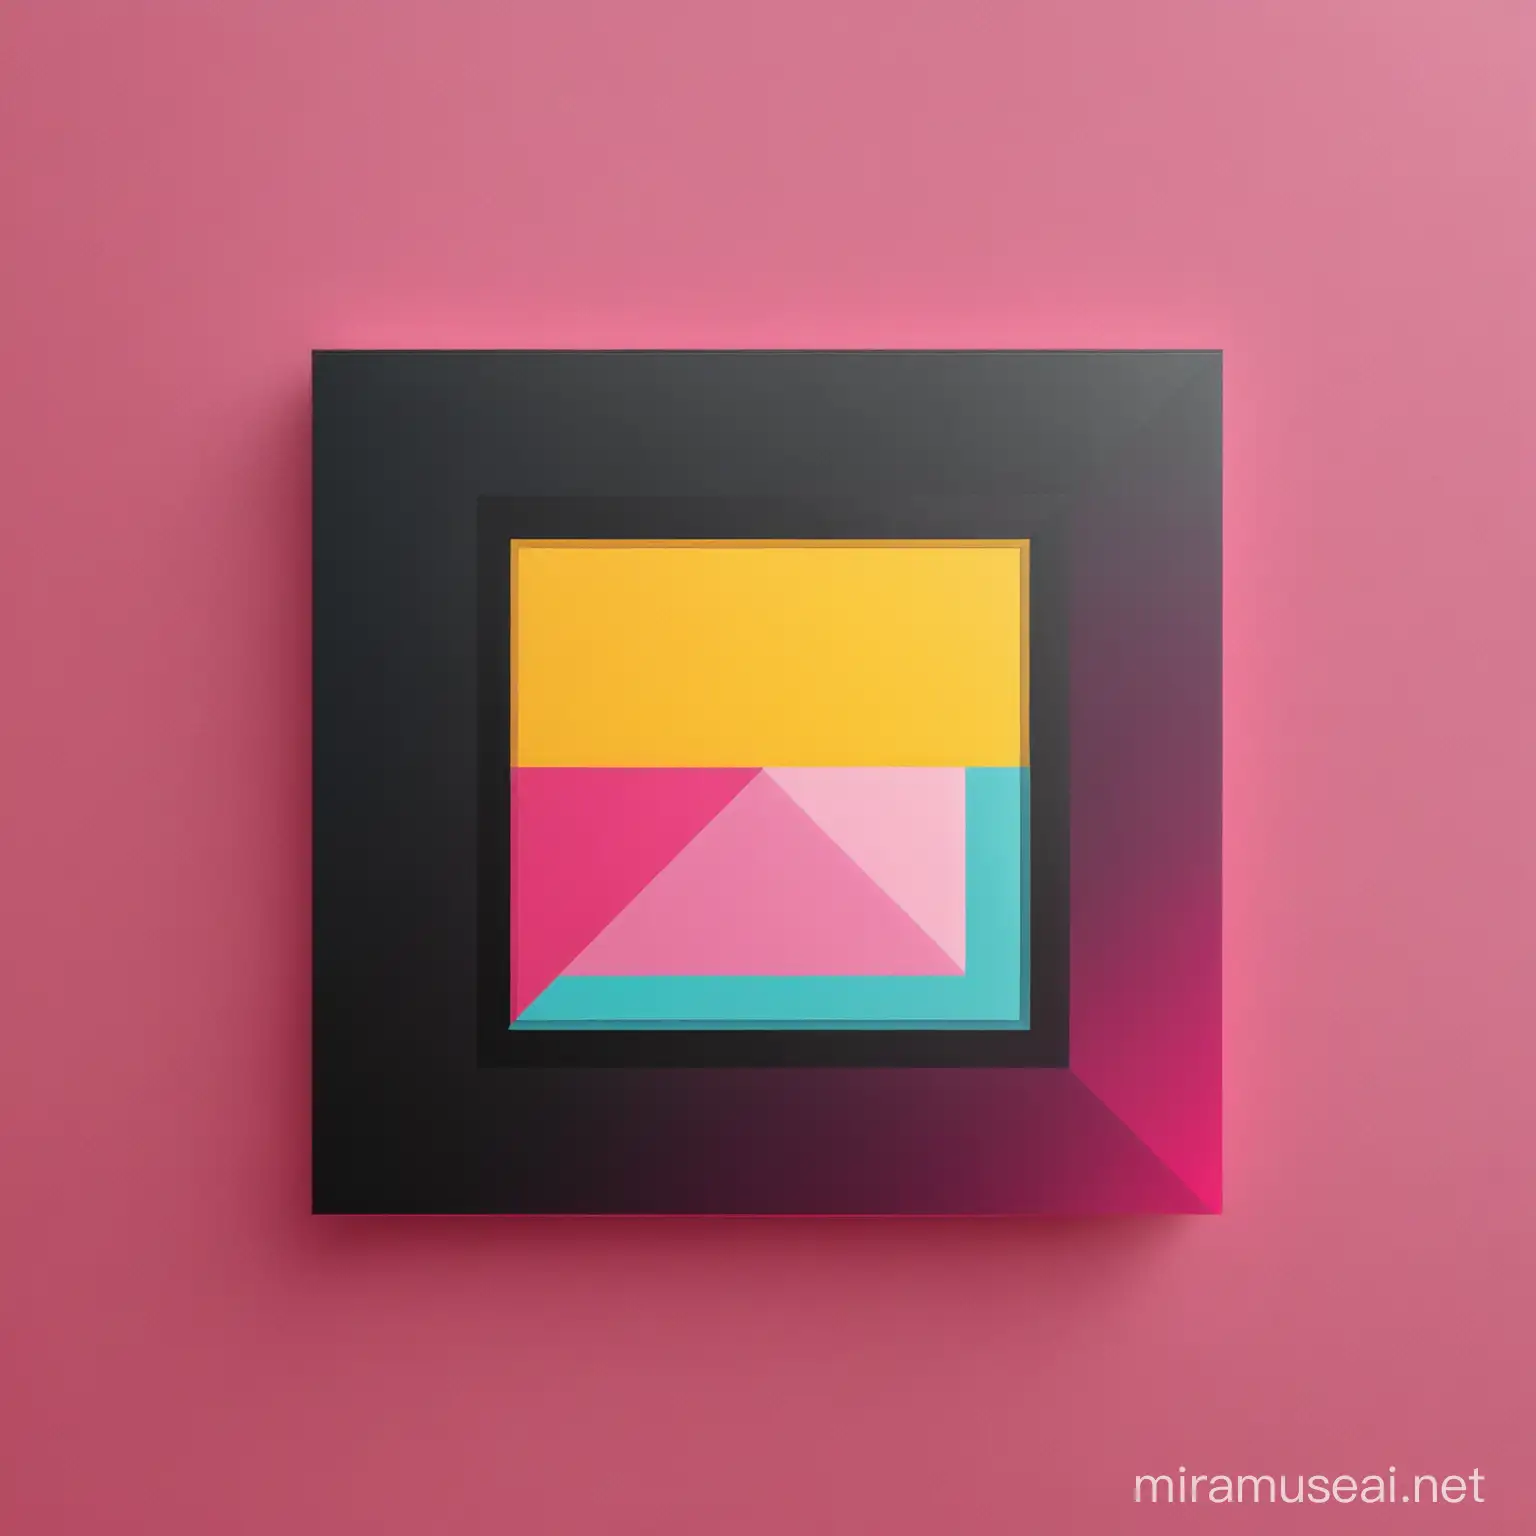 Minimalist Square Field with Cyan Magenta Yellow and Black Background